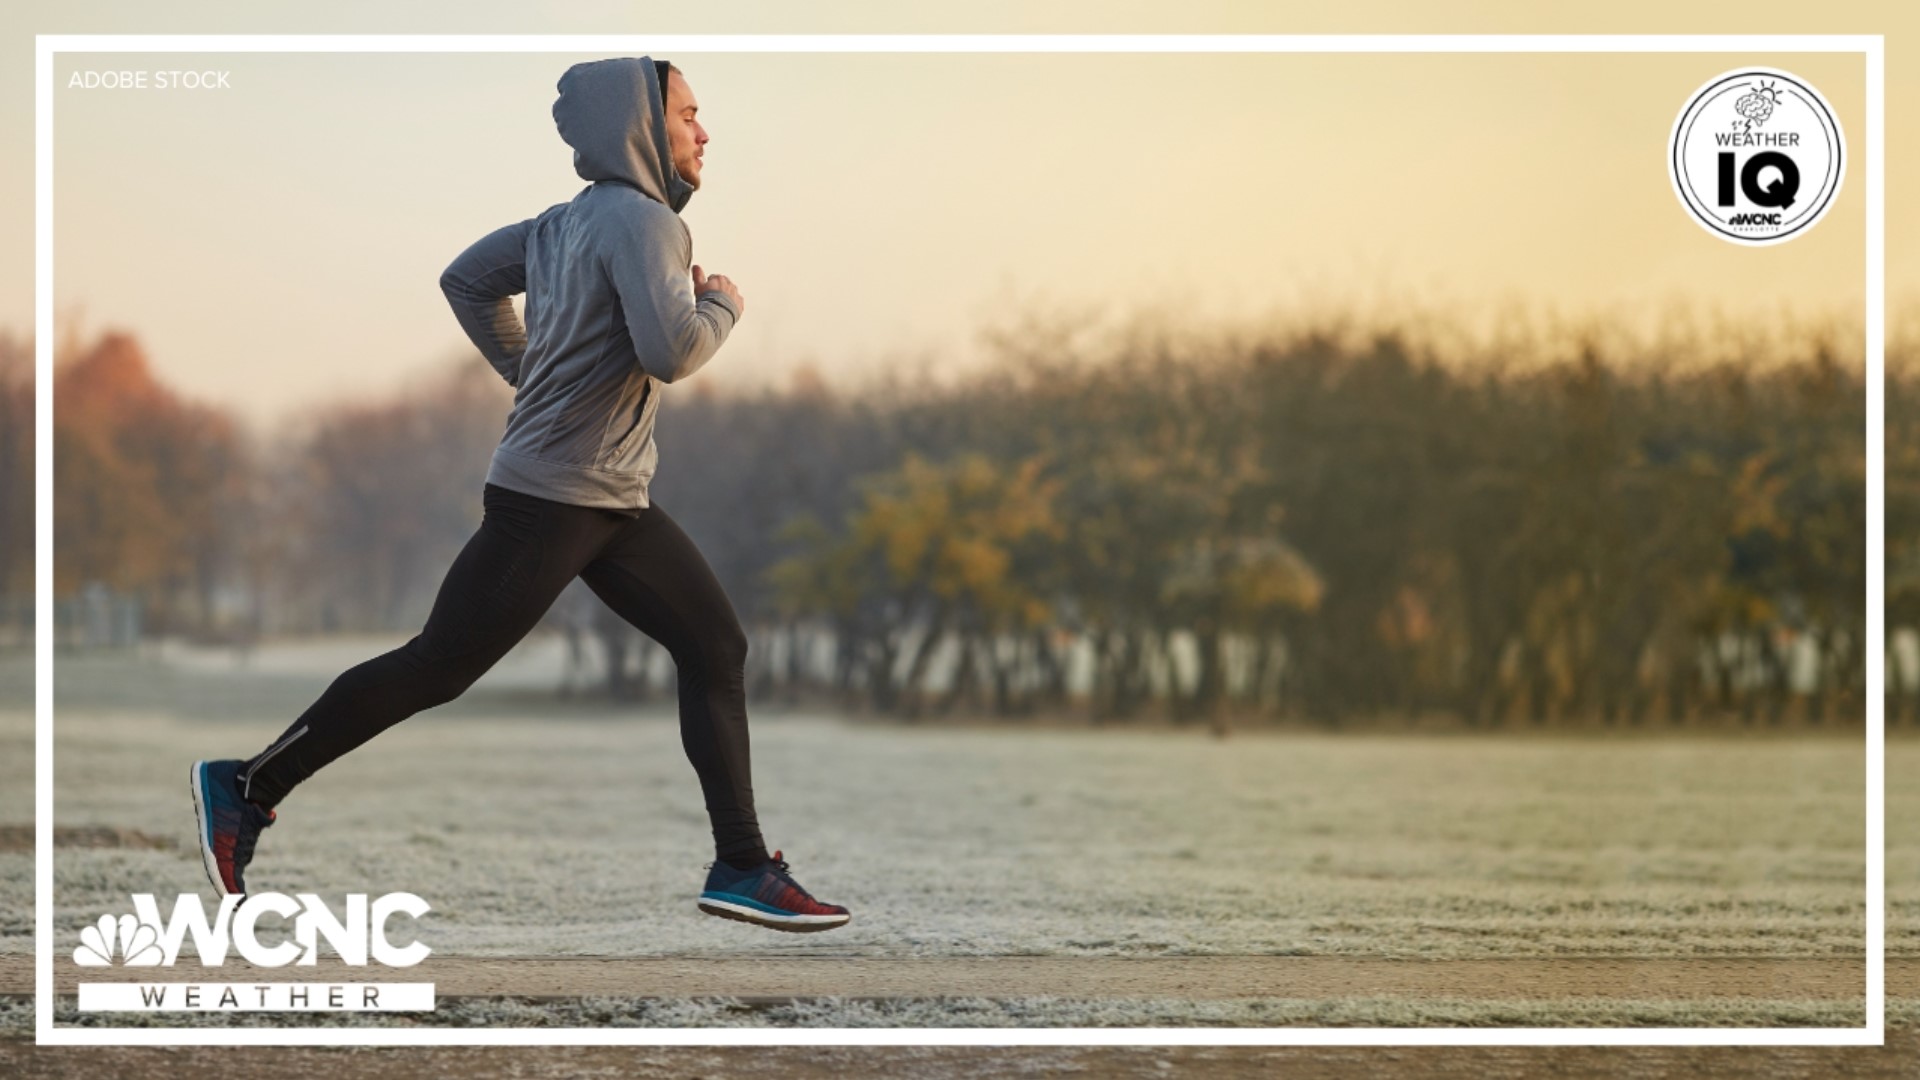 We are now three days into the new year and perhaps one of your resolutions was to run more, which can be tough to get motivation to run now that it's winter.